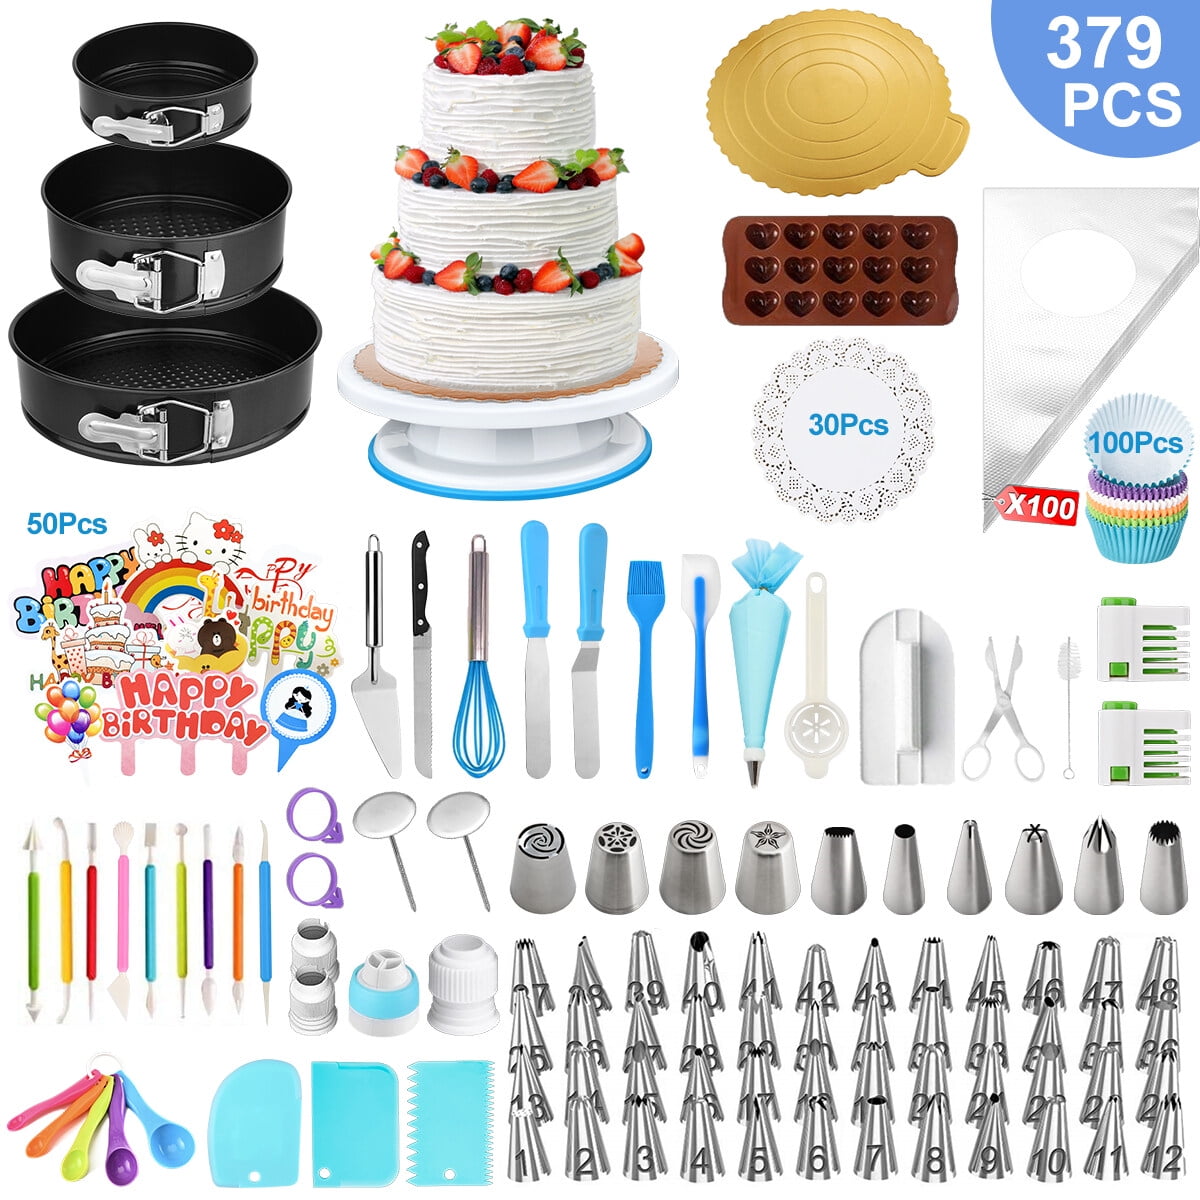 Cake Decorating Supplies Kit Enhance Your Cake Decorating Skills with  Piping Tips, Scrapers, Silicone Baking Pans, Baking Cups, Piping Bags,  Spatula